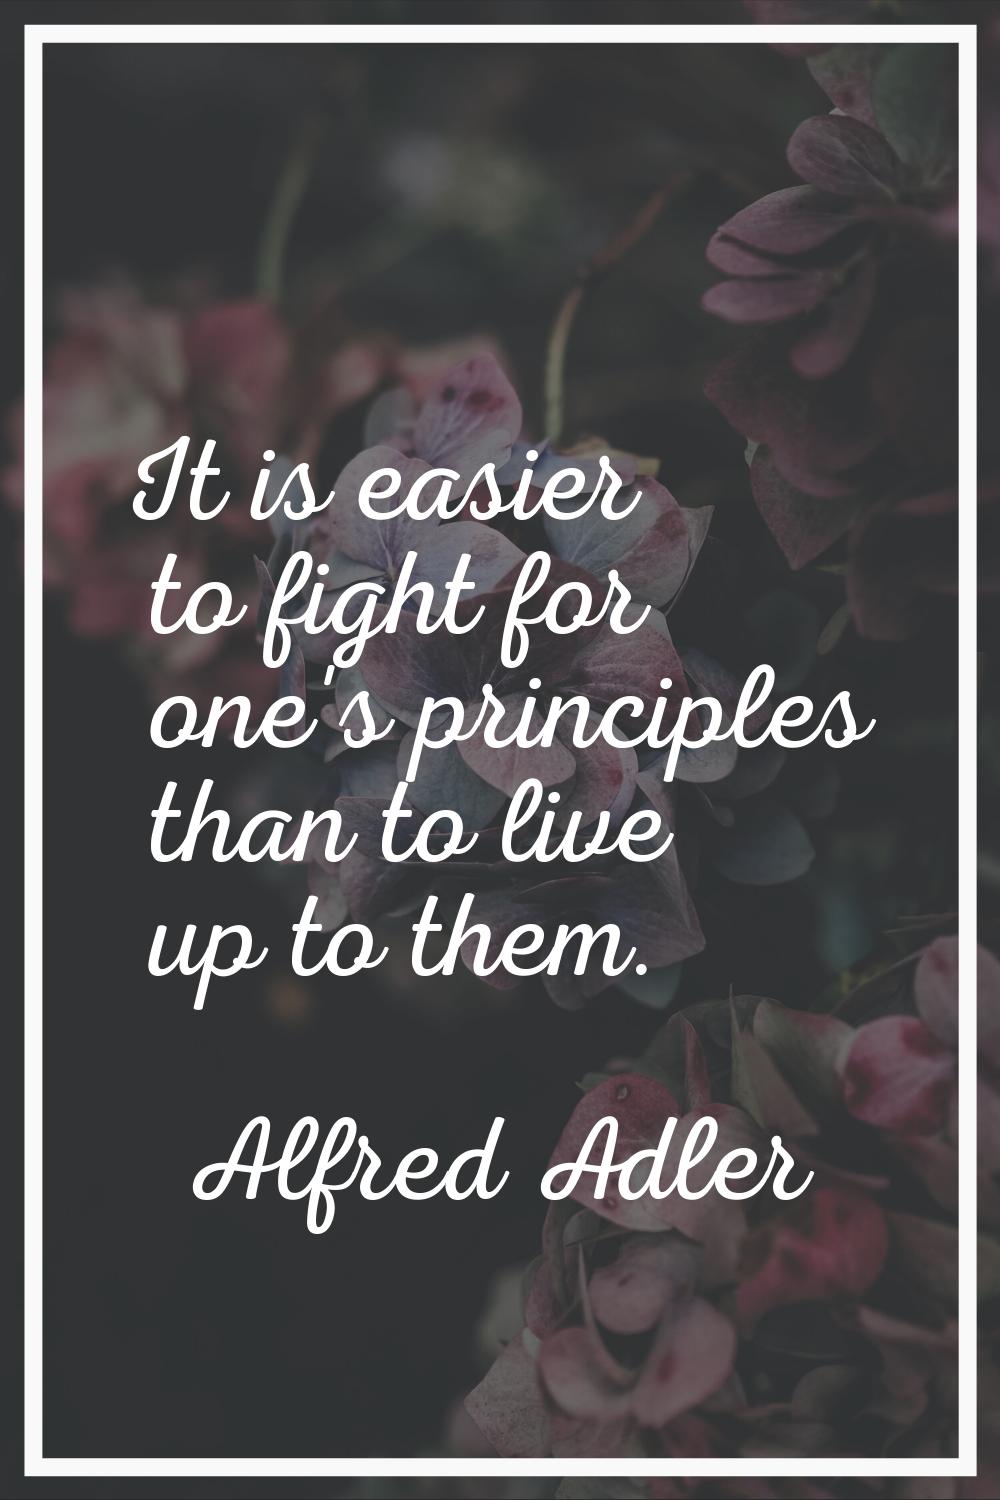 It is easier to fight for one's principles than to live up to them.